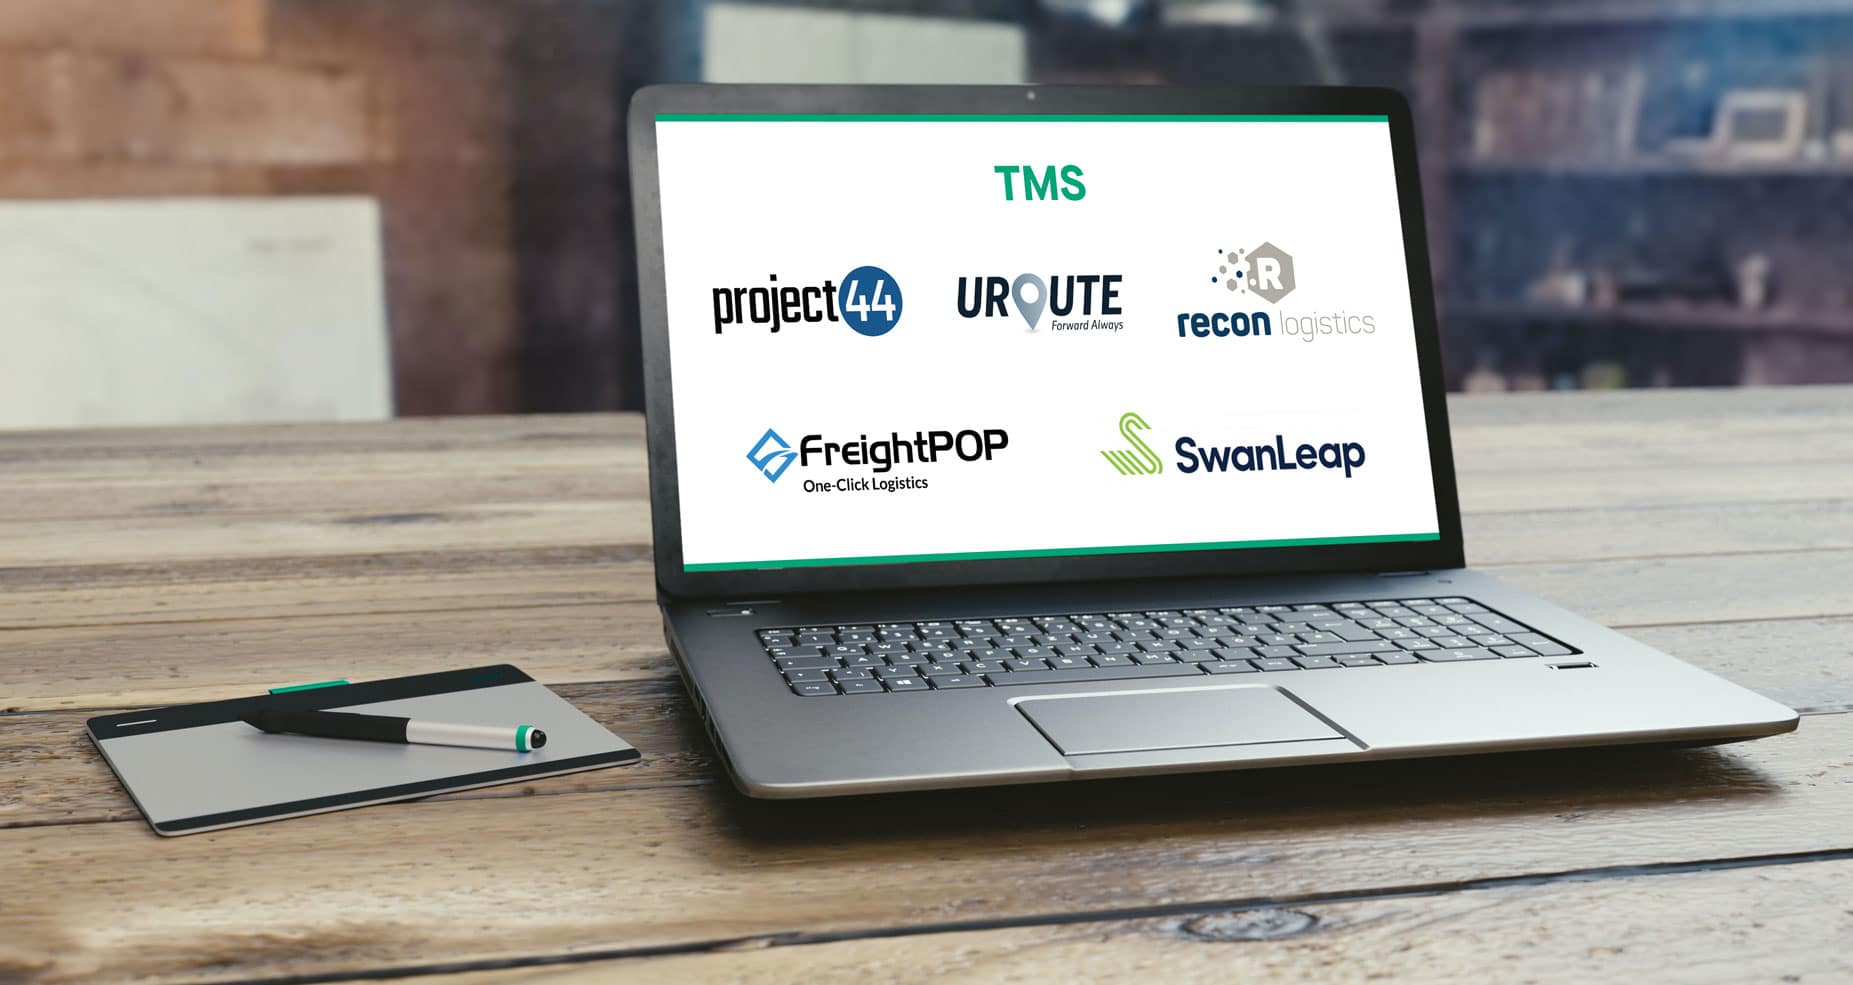 Transfix Announces New TMS Integration Partnerships to Seamlessly Service Shippers of all Sizes